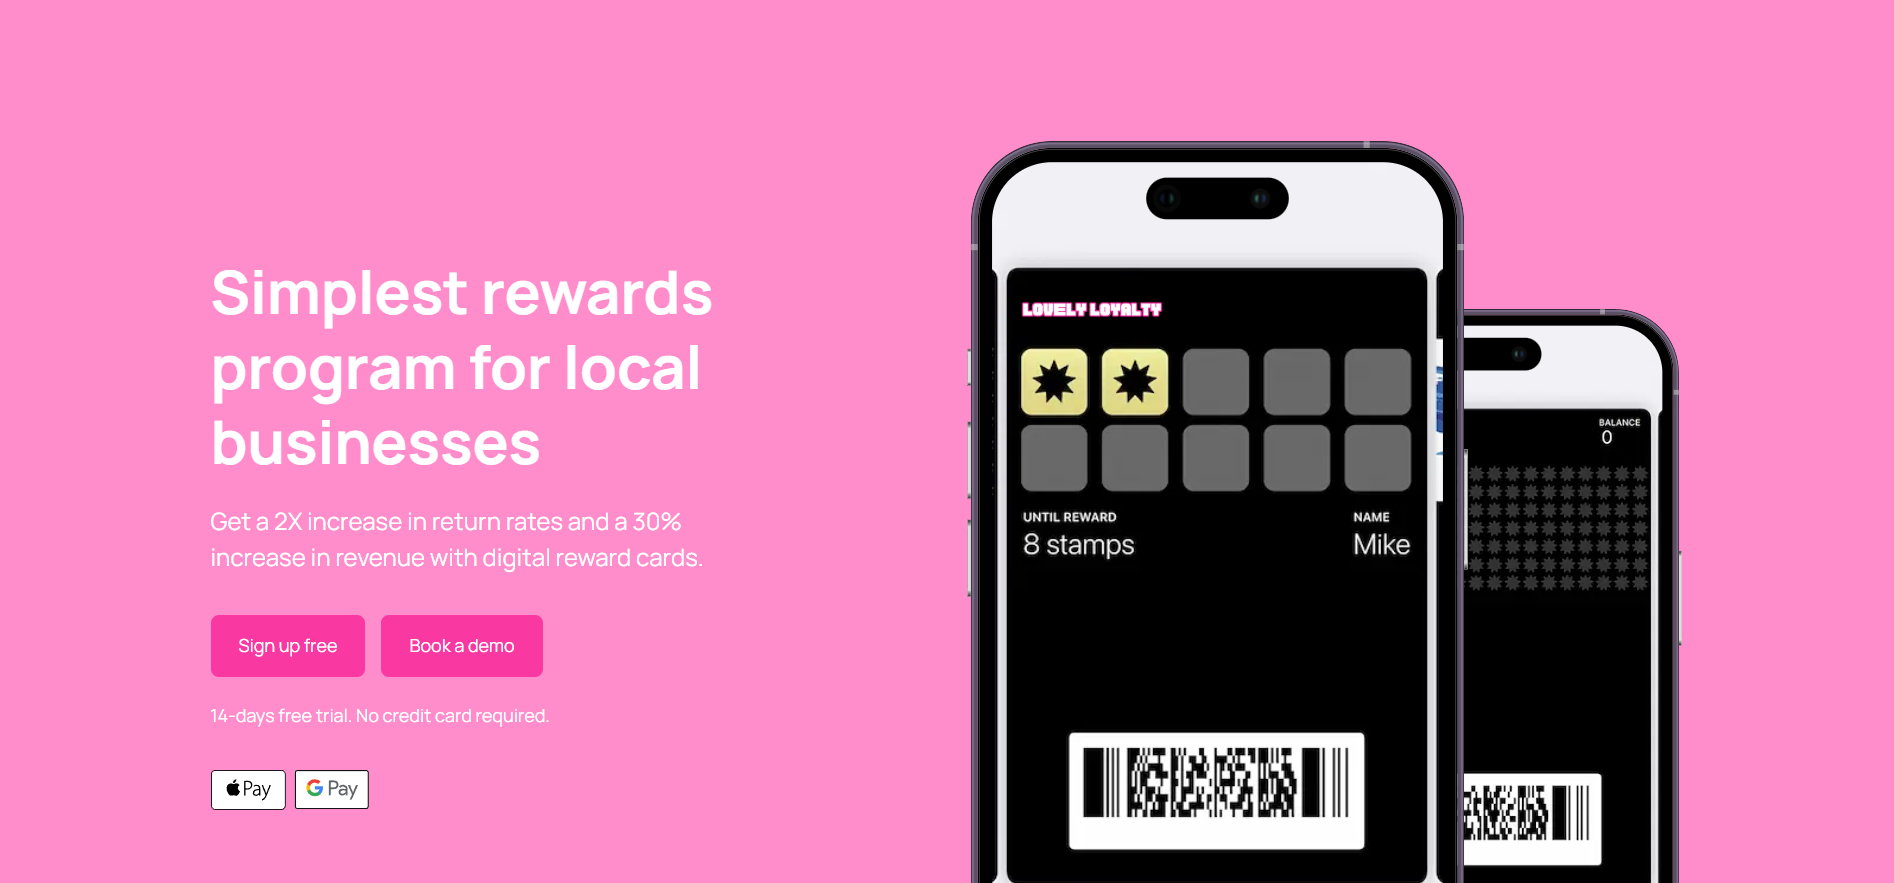 Lovely Loyalty is the simplest rewards program for local businesses. Our digital loyalty cards work without extra equipment, convincing your customers to install yet another app, or anything except a few minutes of your time.